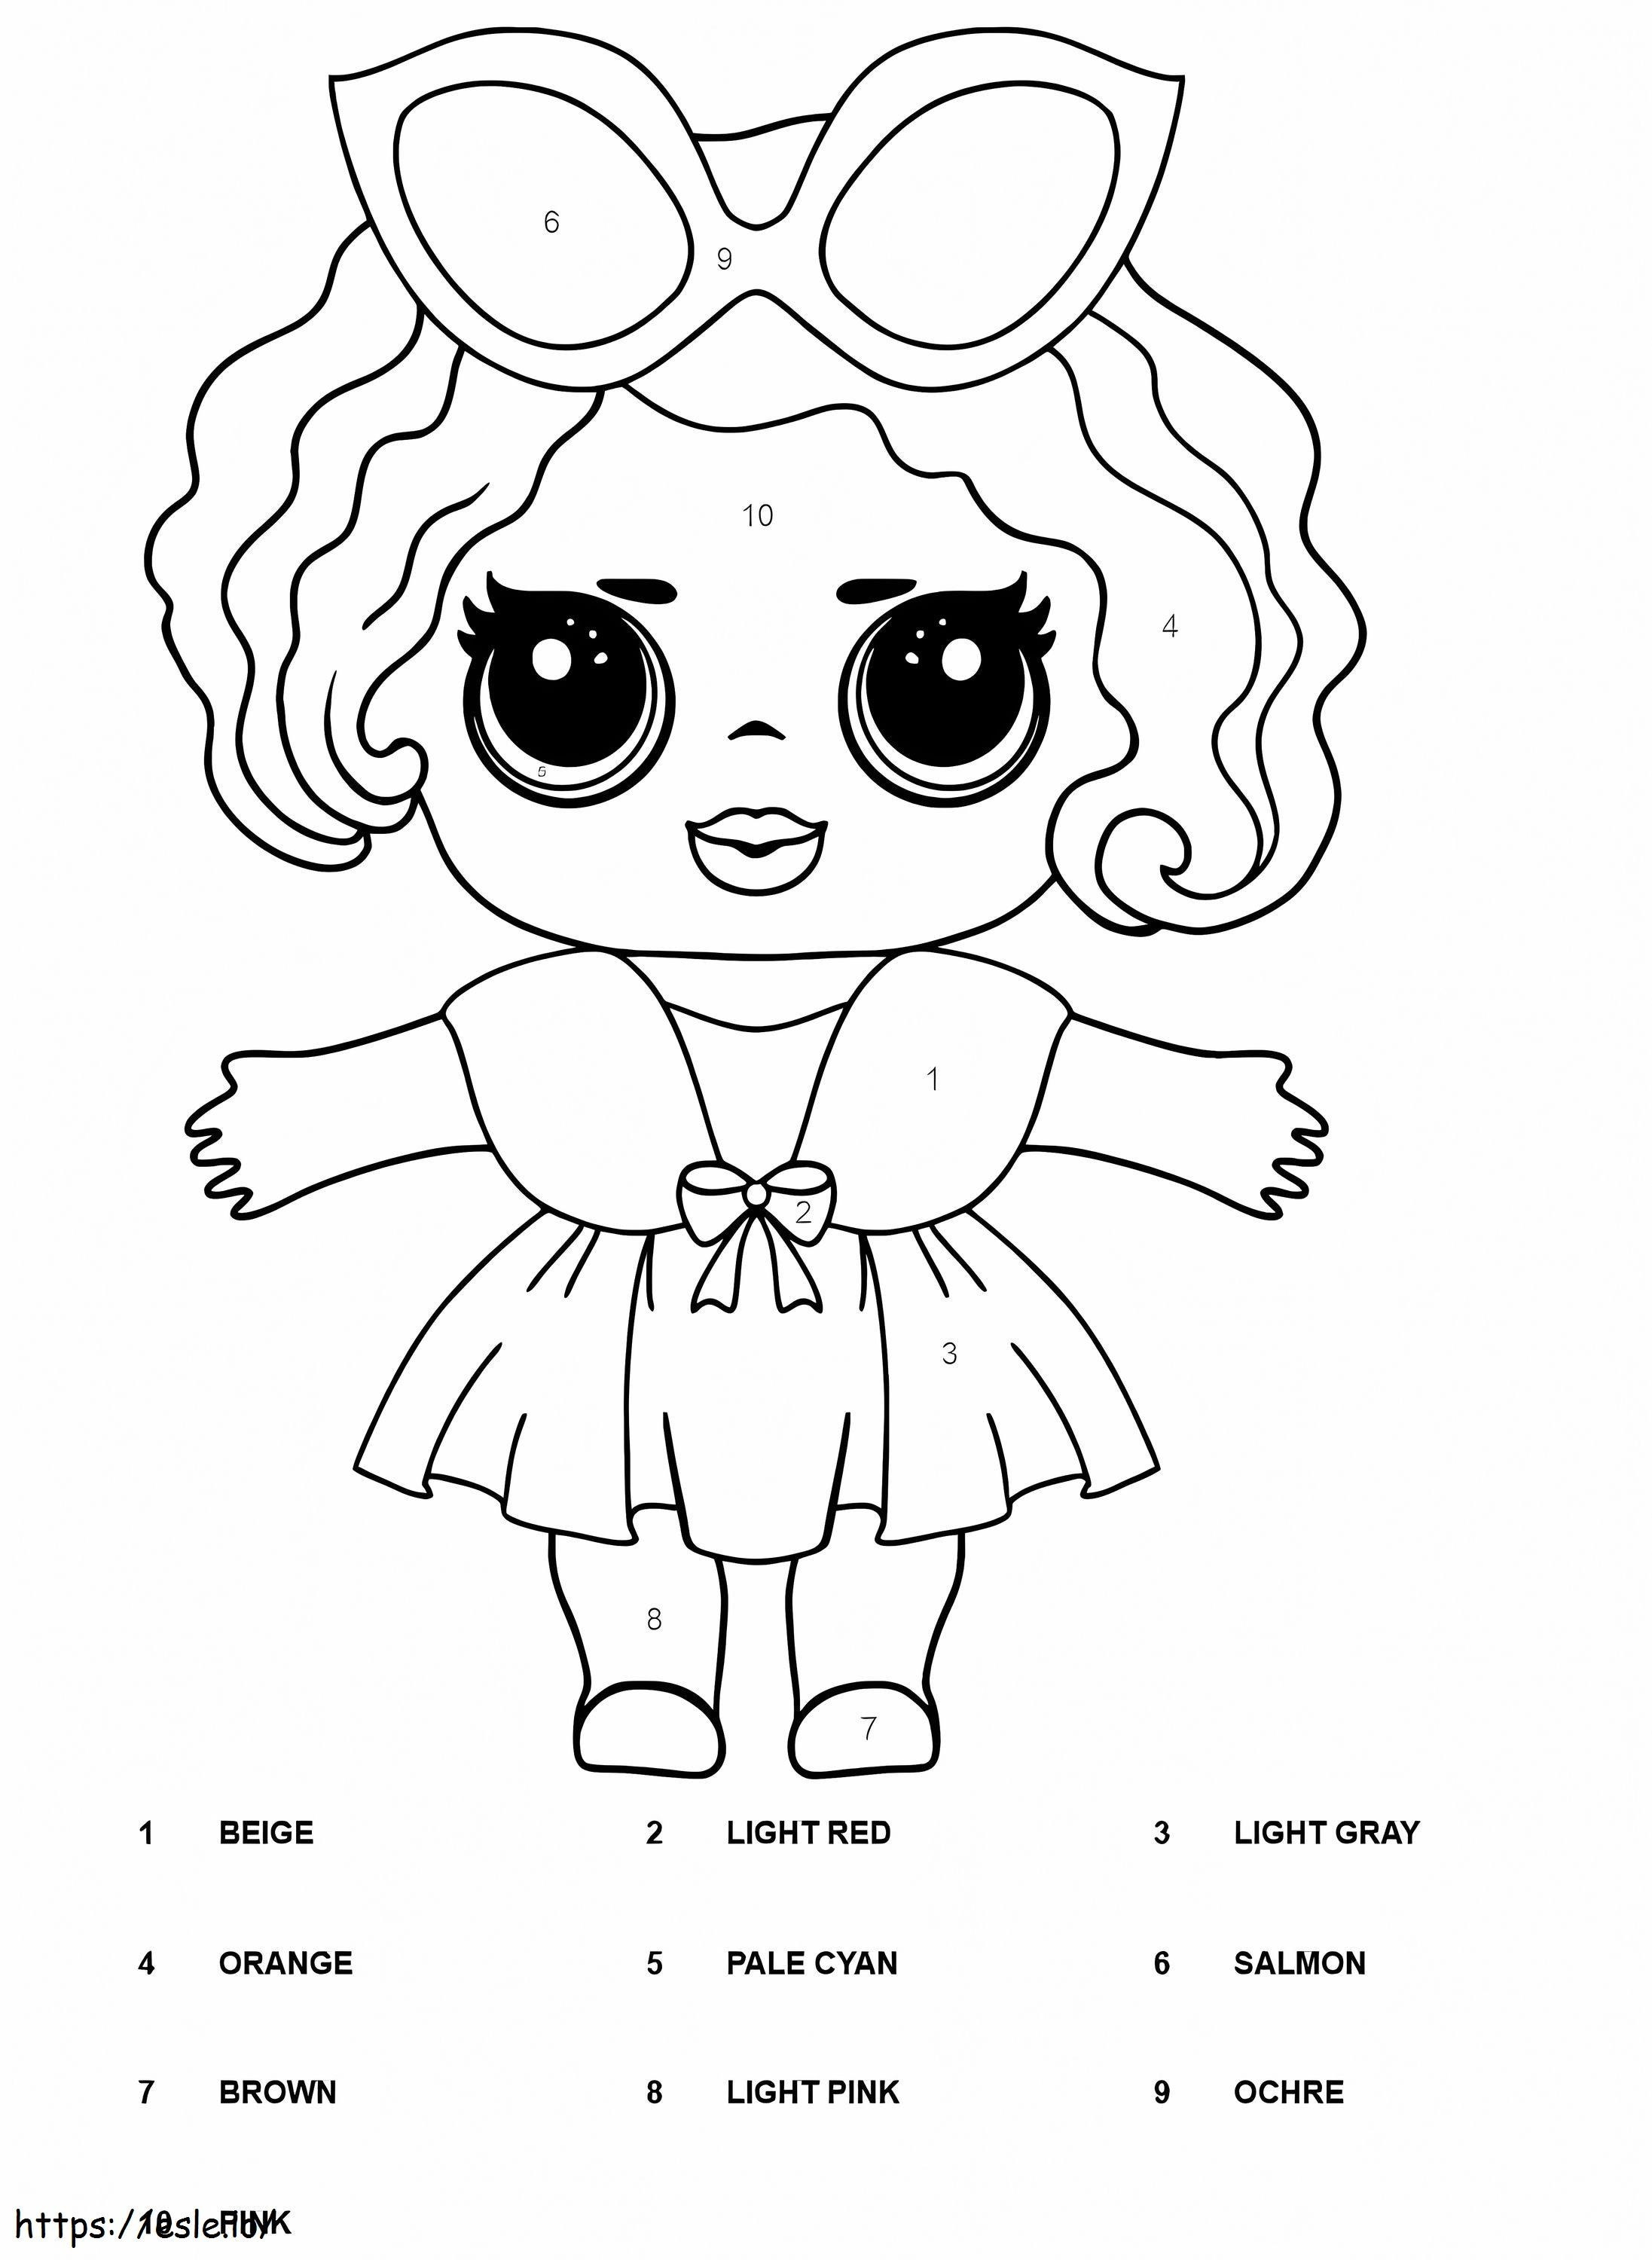 Leading Baby LOL Surprise Color By Number coloring page